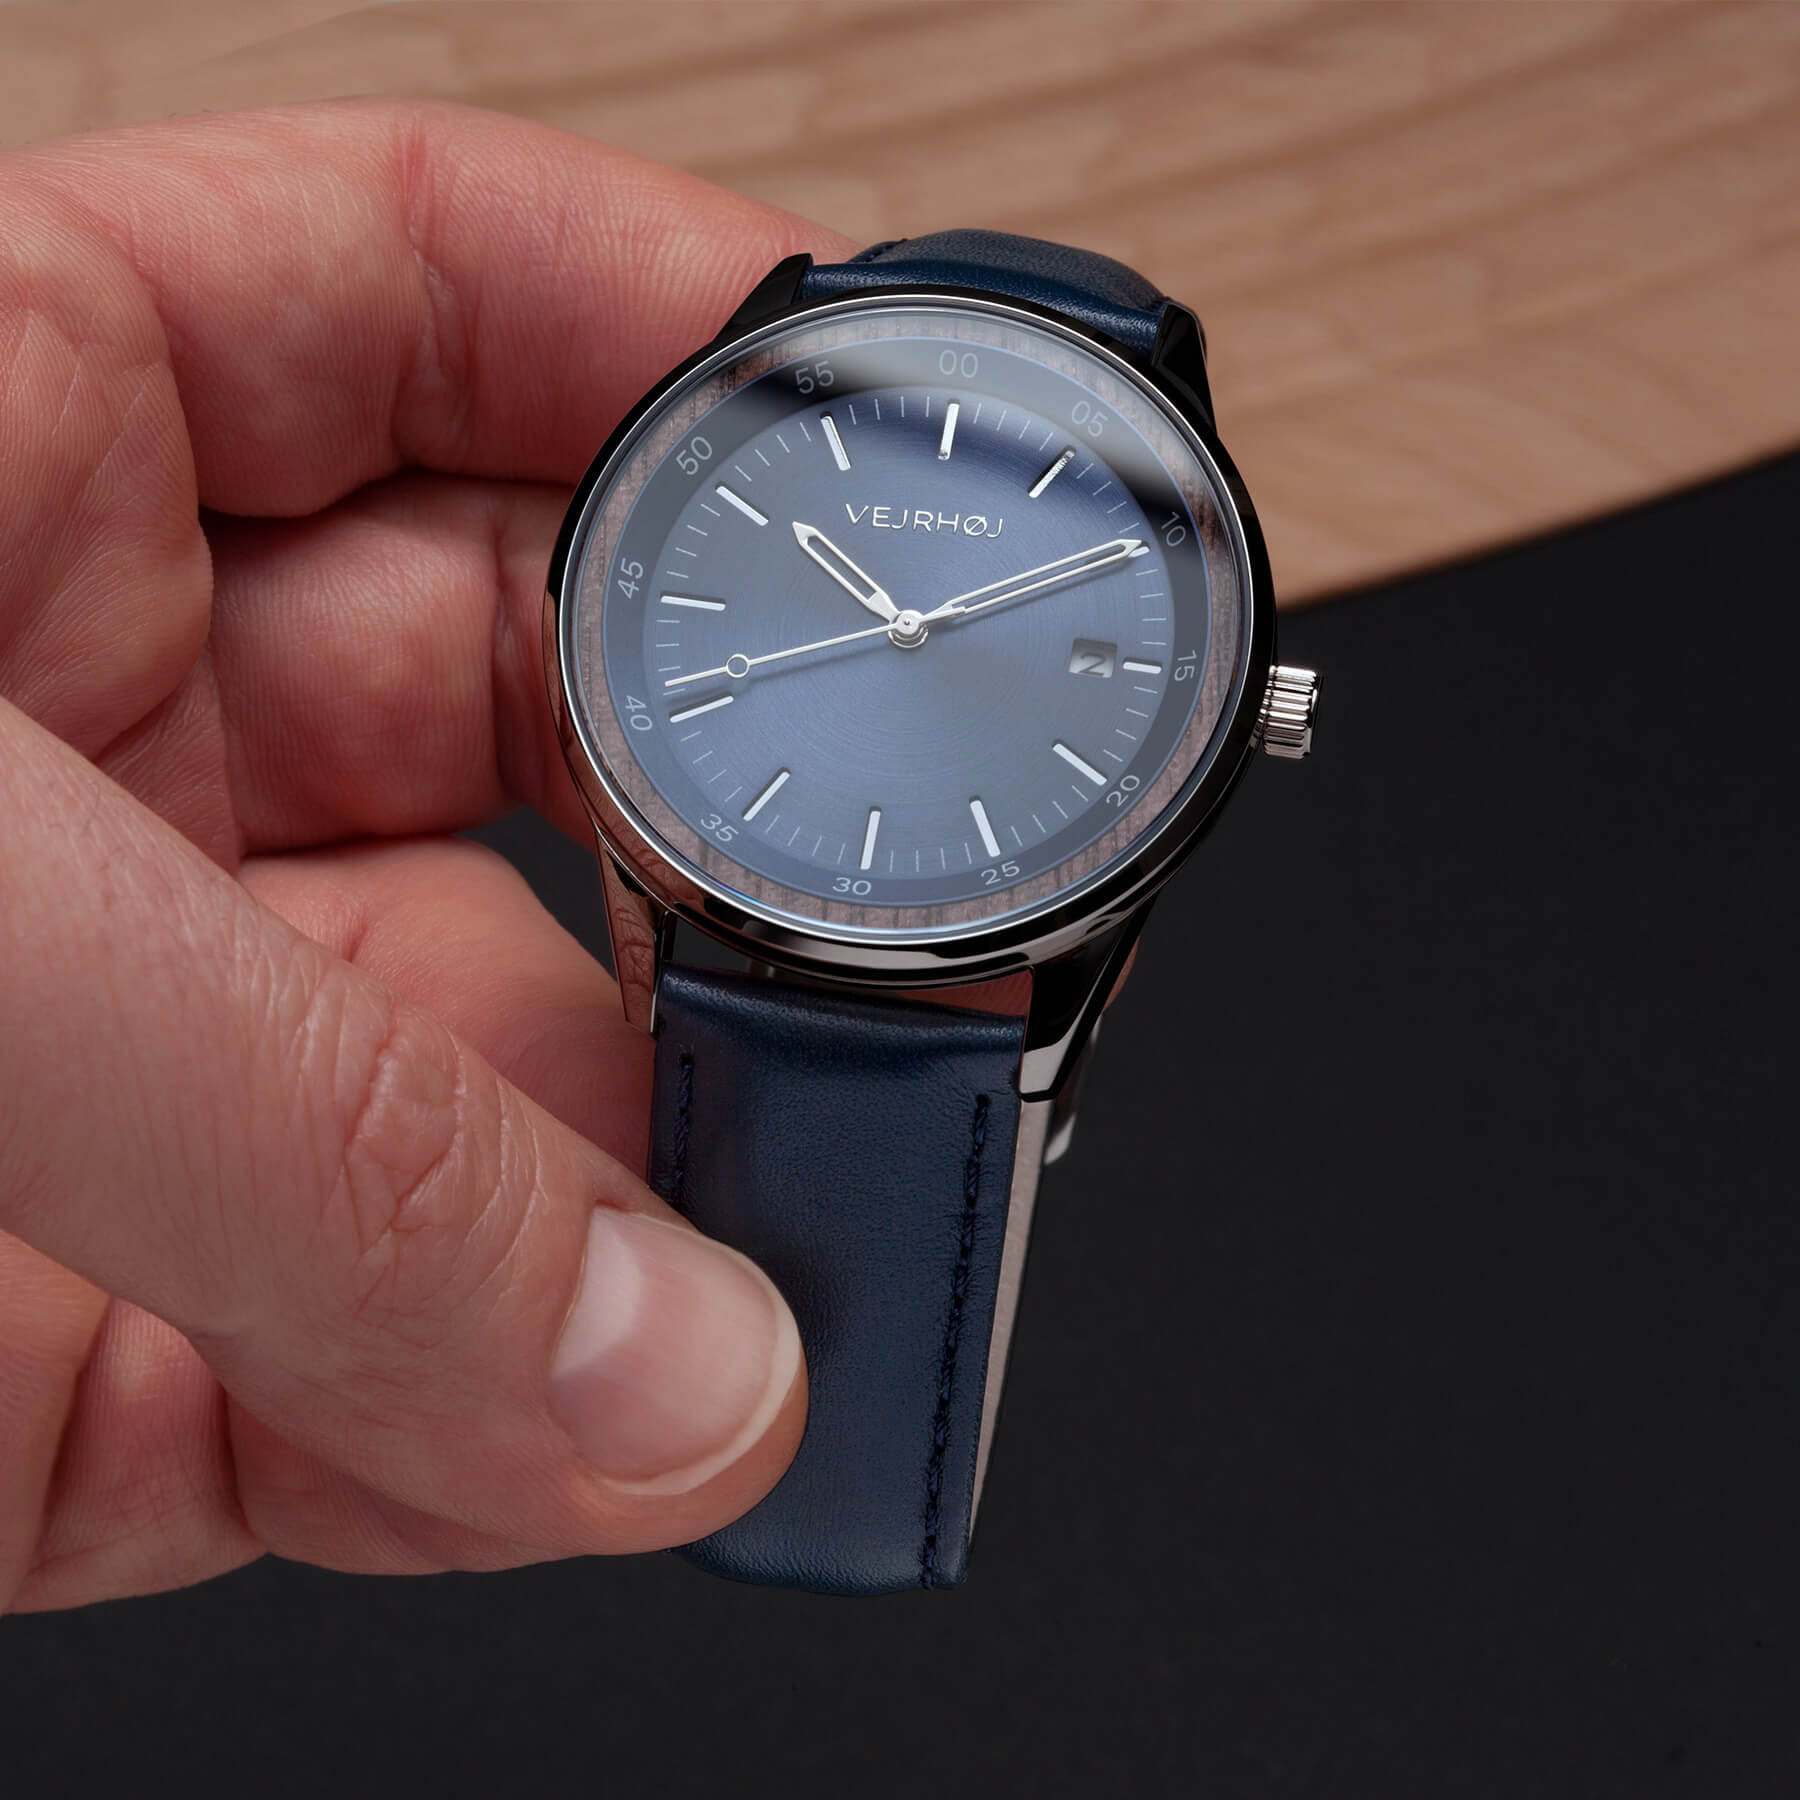 A blue automatic watch with silver hands and blue straps held by a hand